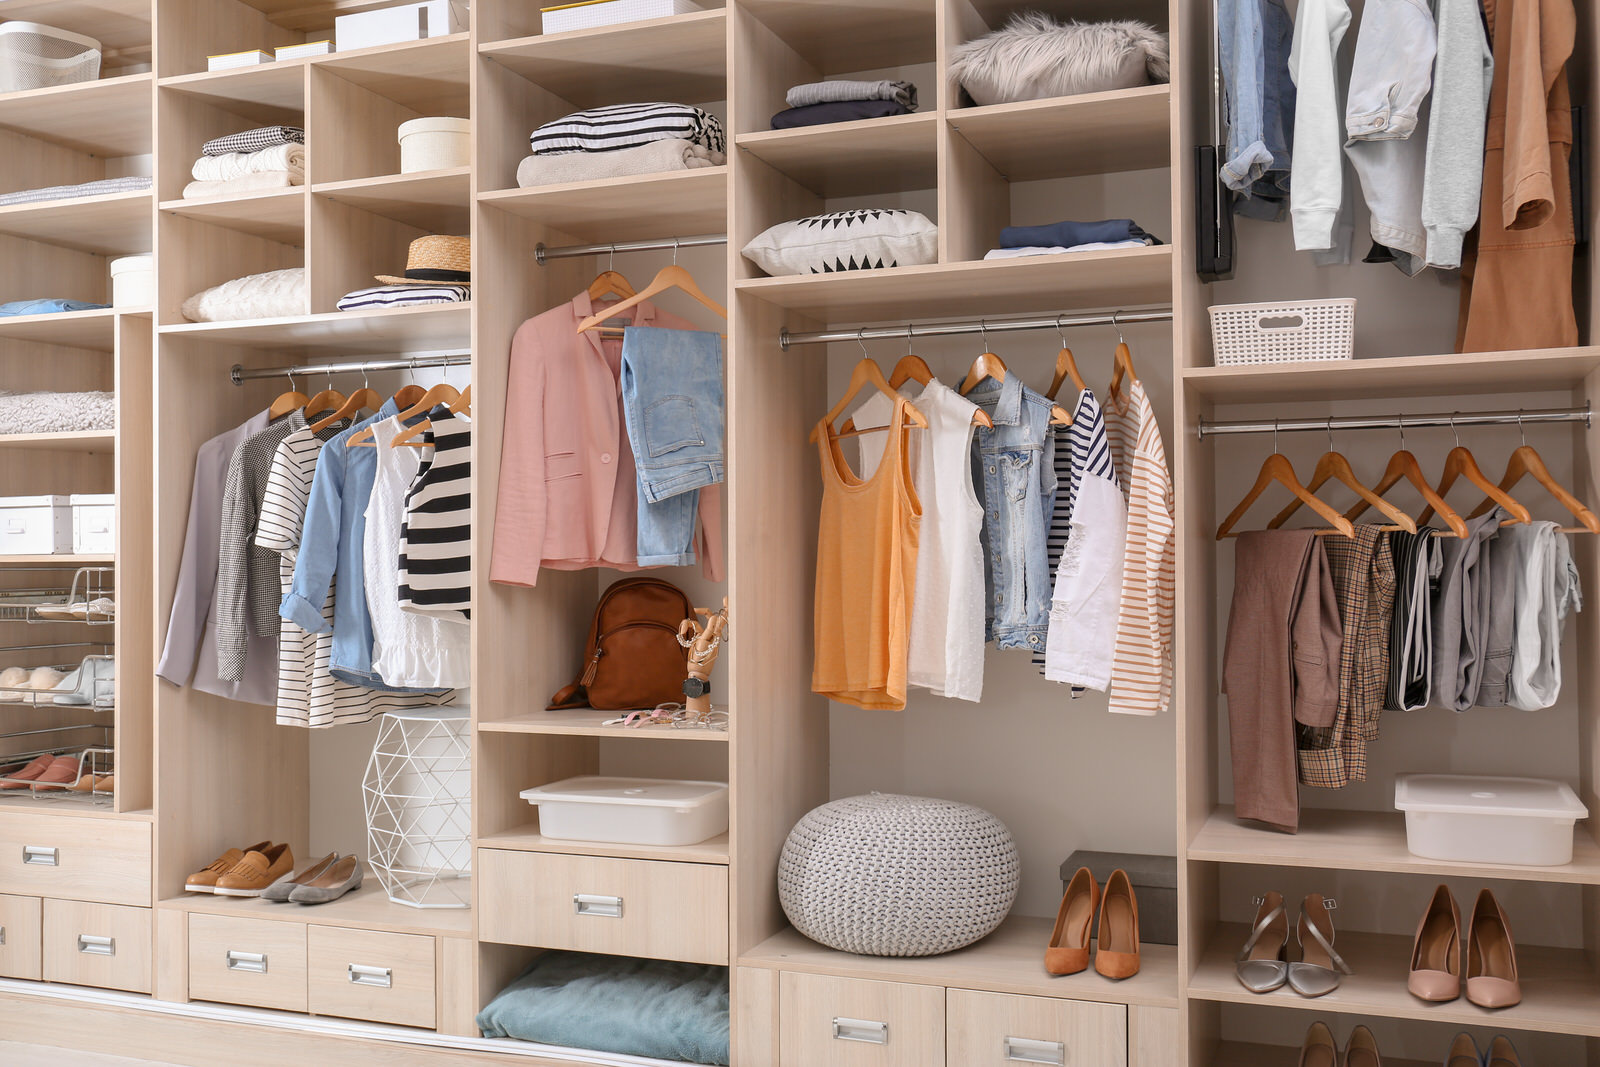 Stylish clothes, shoes and home stuff in large wardrobe closet – Closet ...